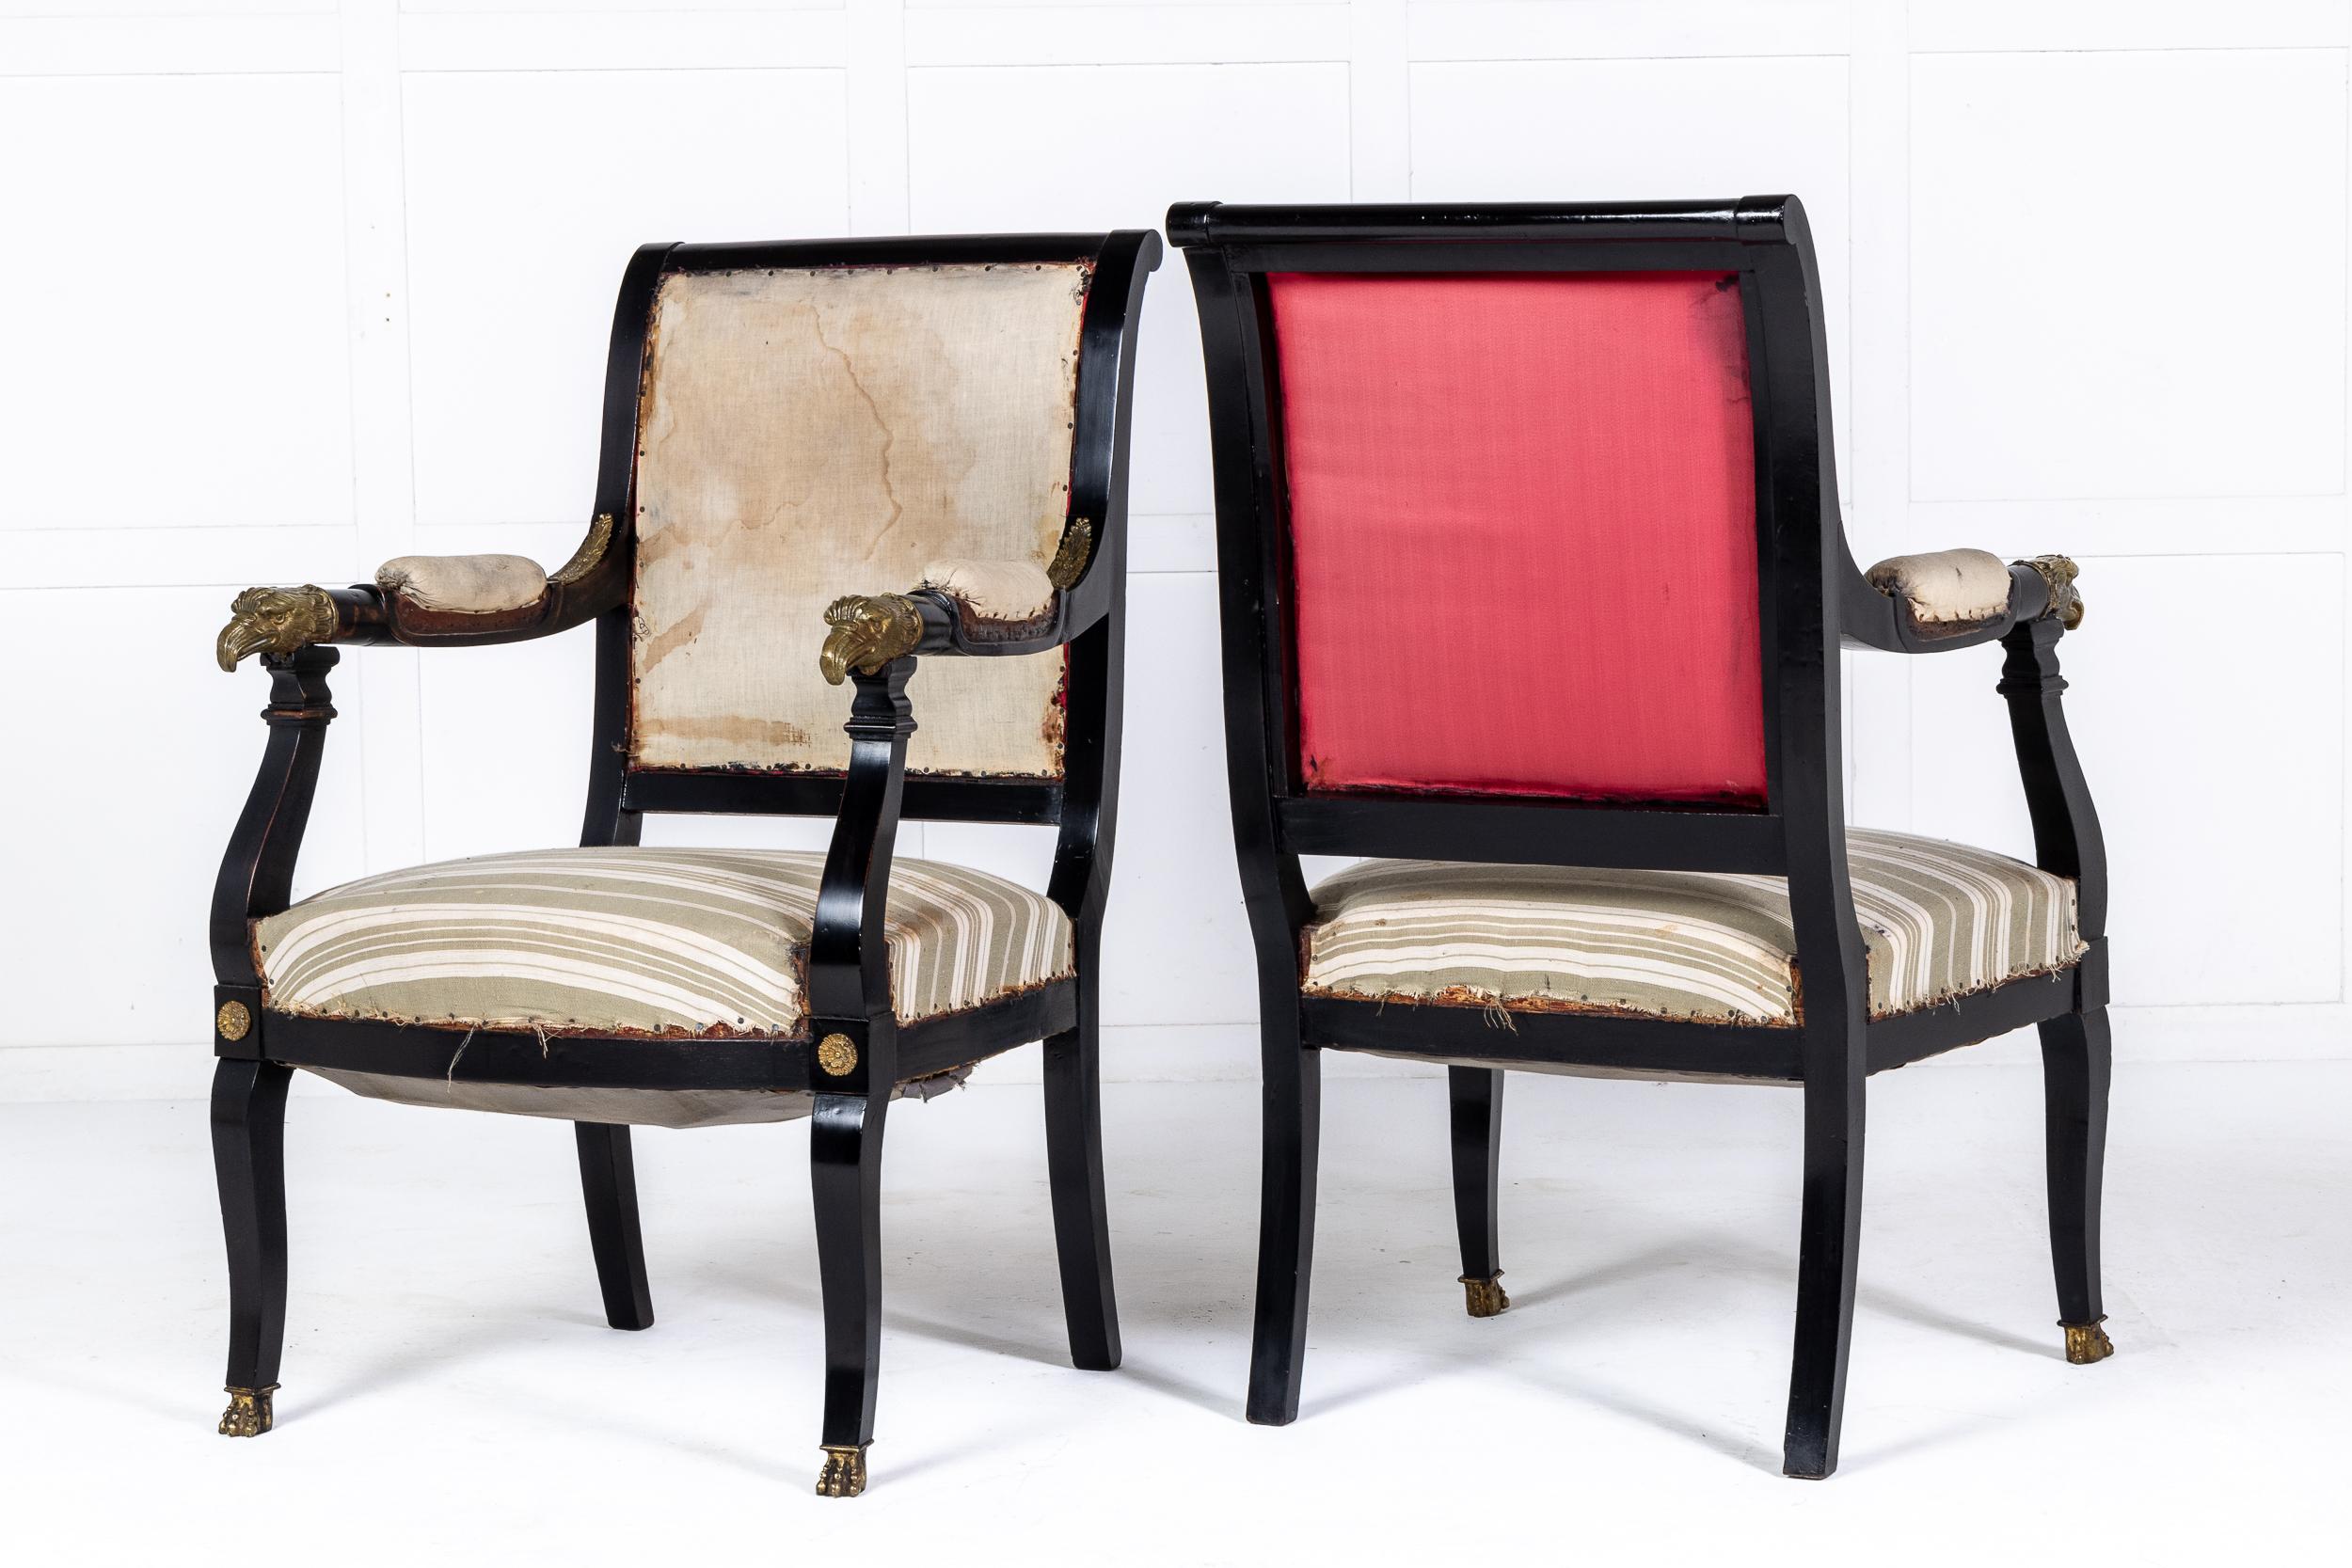 A pair of French Empire style ebonised armchairs with fine eagle head mounts.

These fine armchairs, in the early 19th century Empire style, were made in France c.1910. The ebonised finish contrasts beautifully with the fine ormolu mounts, including